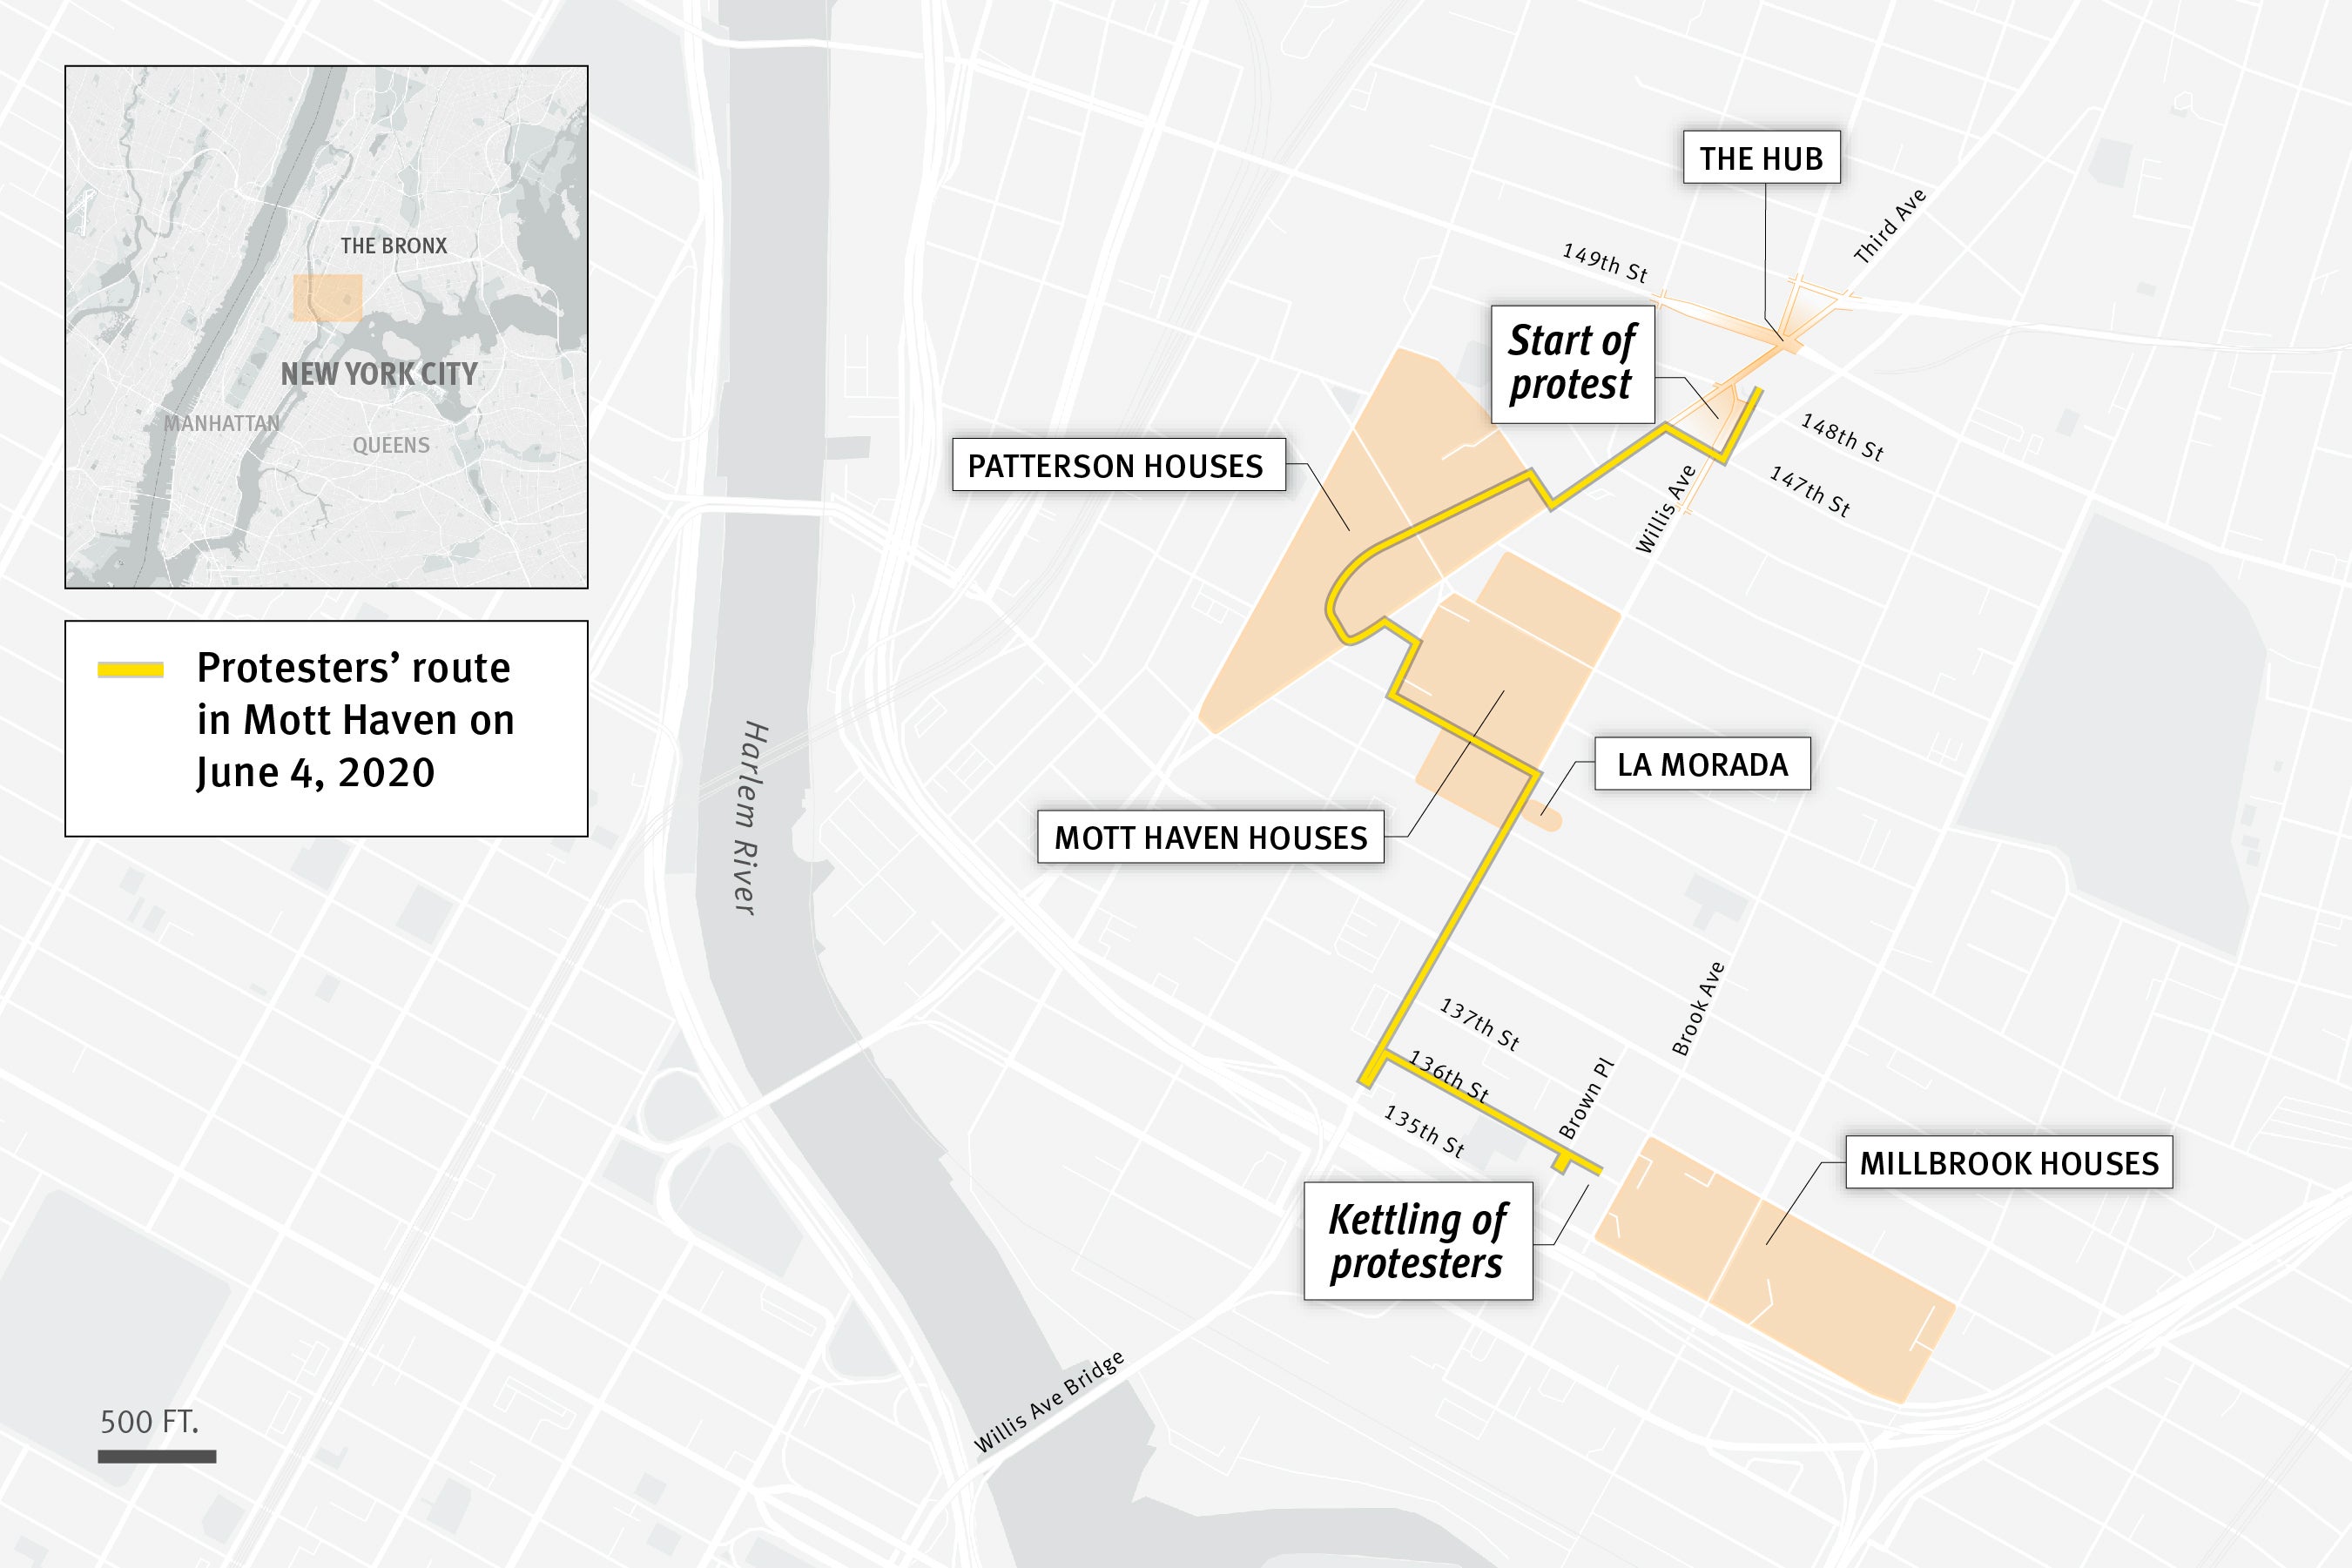 A map of the protest route in Mott Haven